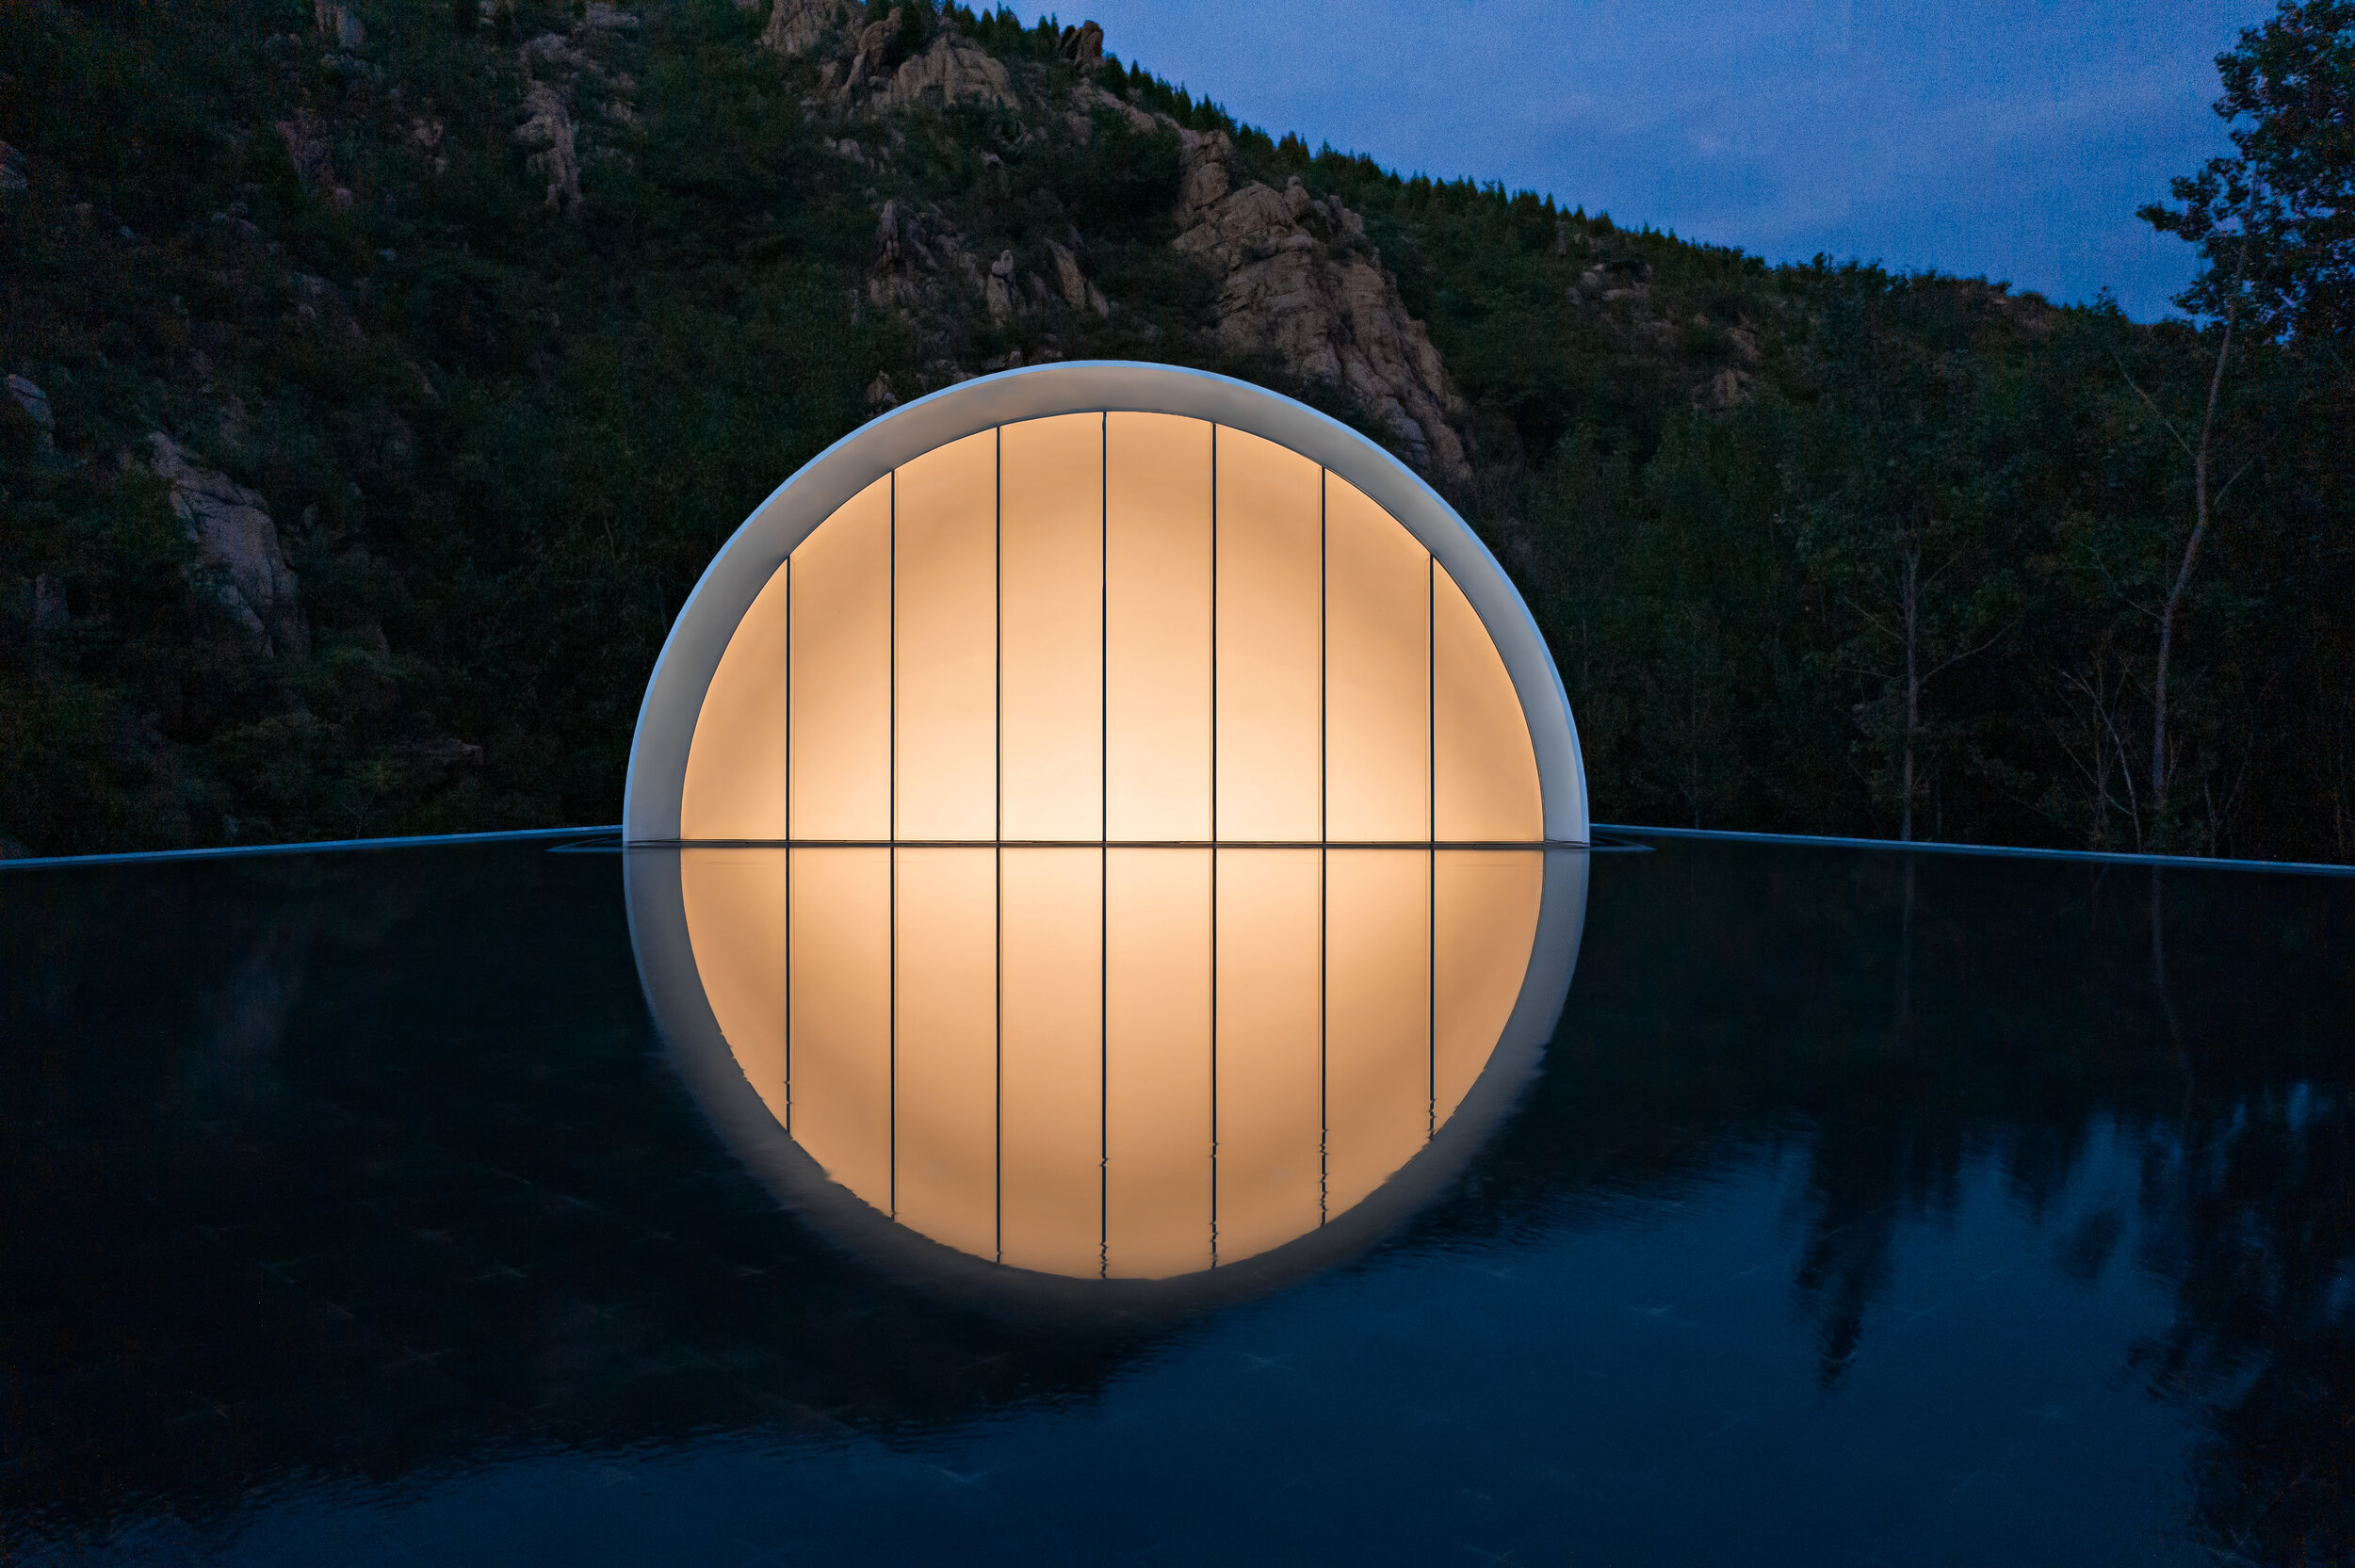 syn-architects-the-hometown-moon-09-night-view-the-moon-installation-front.jpg